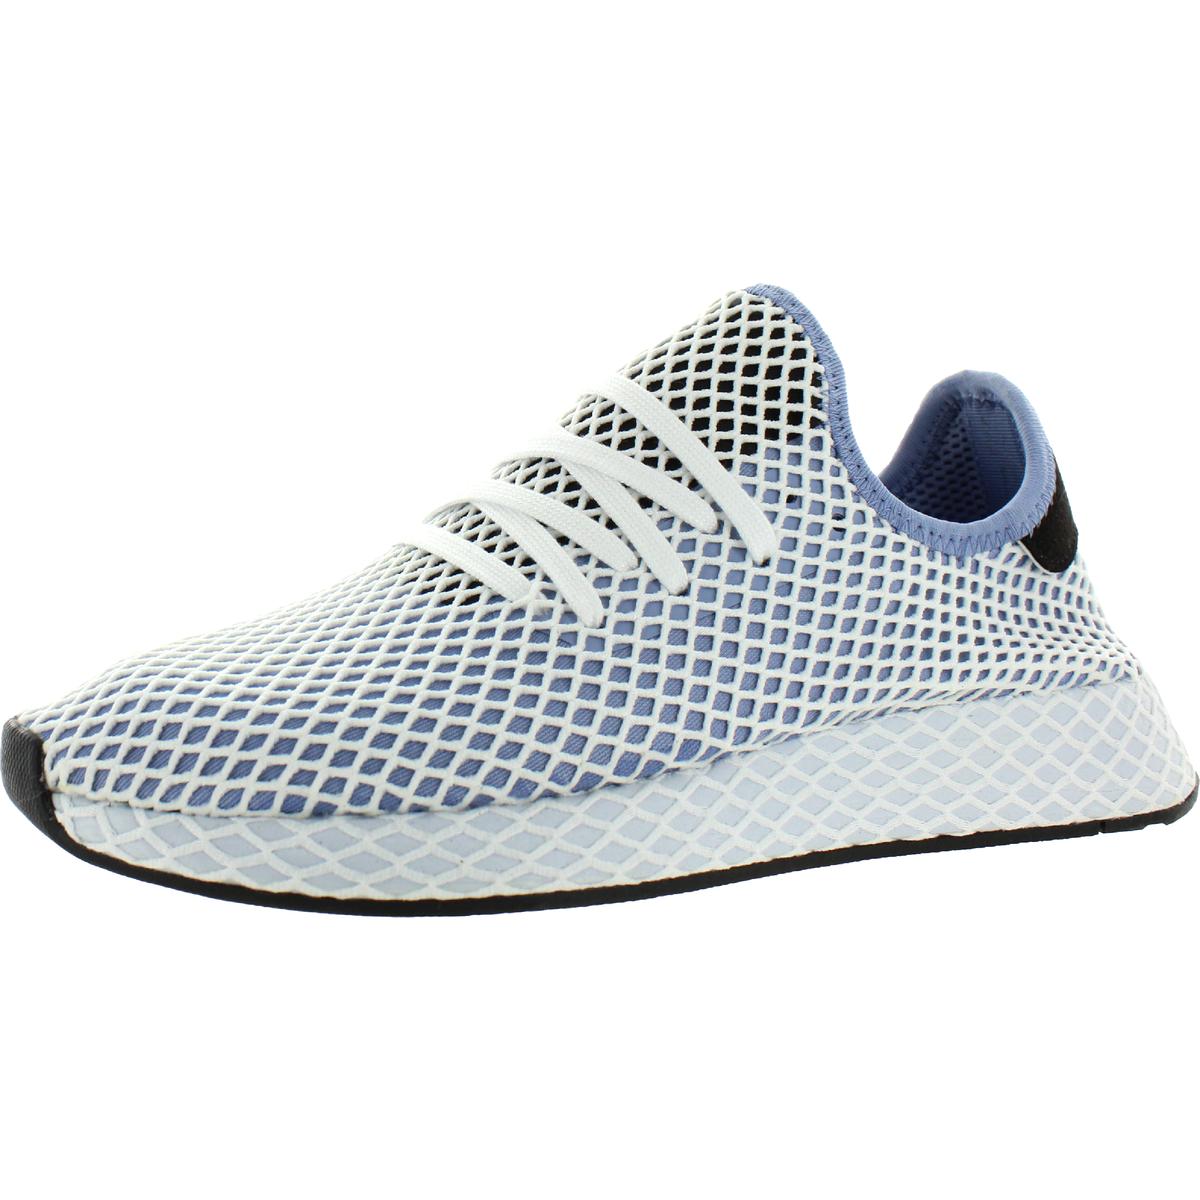 Sticky activity Perth Blackborough Adidas Deerupt Runner W Womens Running Performance Athletic Shoes